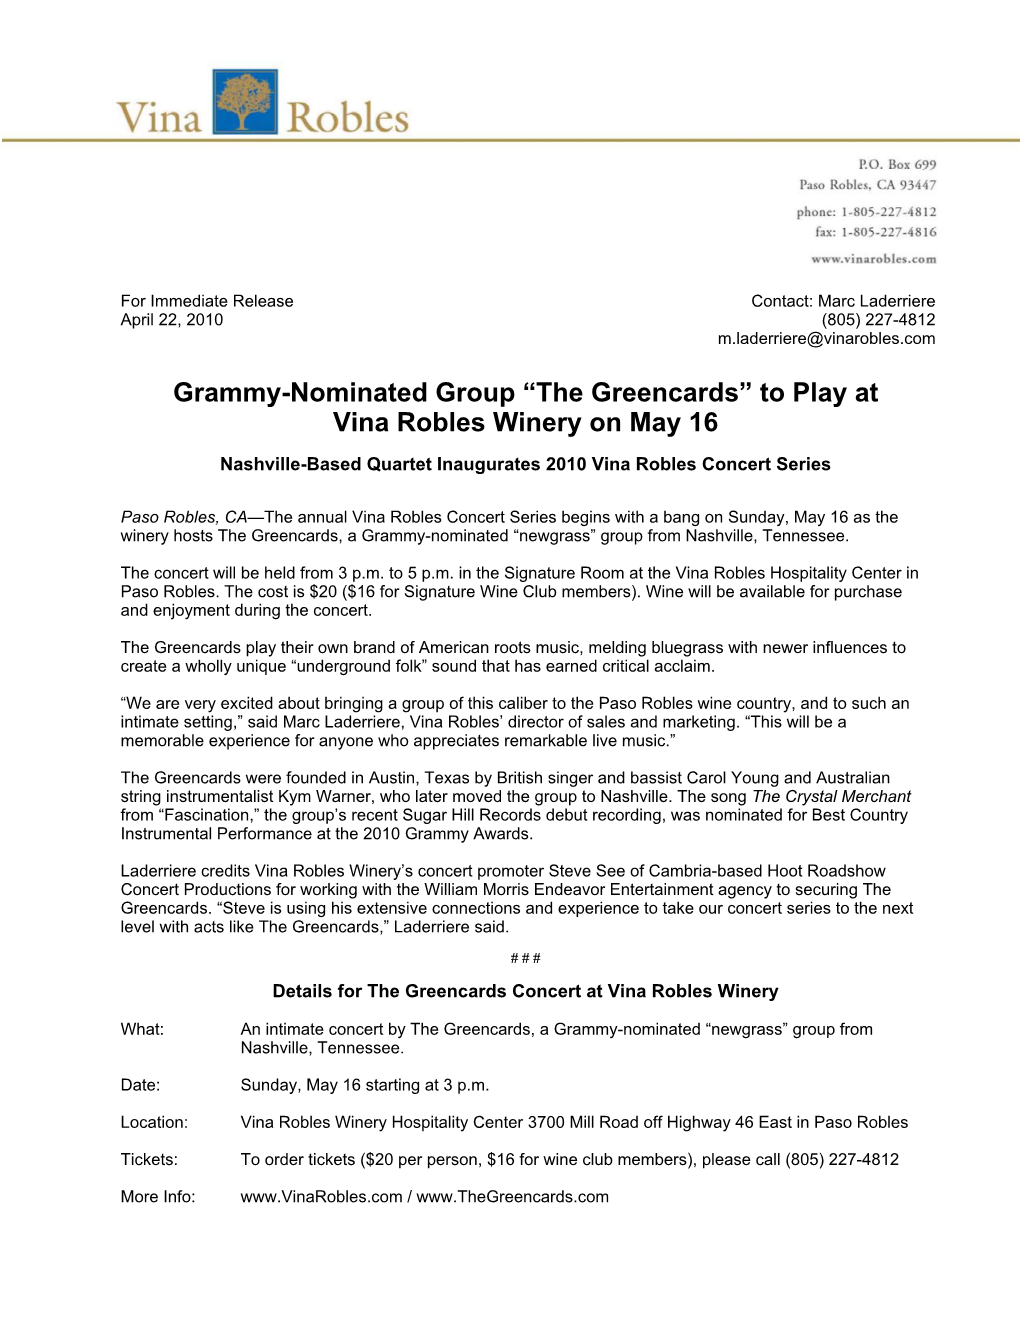 Grammy-Nominated Group “The Greencards” to Play at Vina Robles Winery on May 16